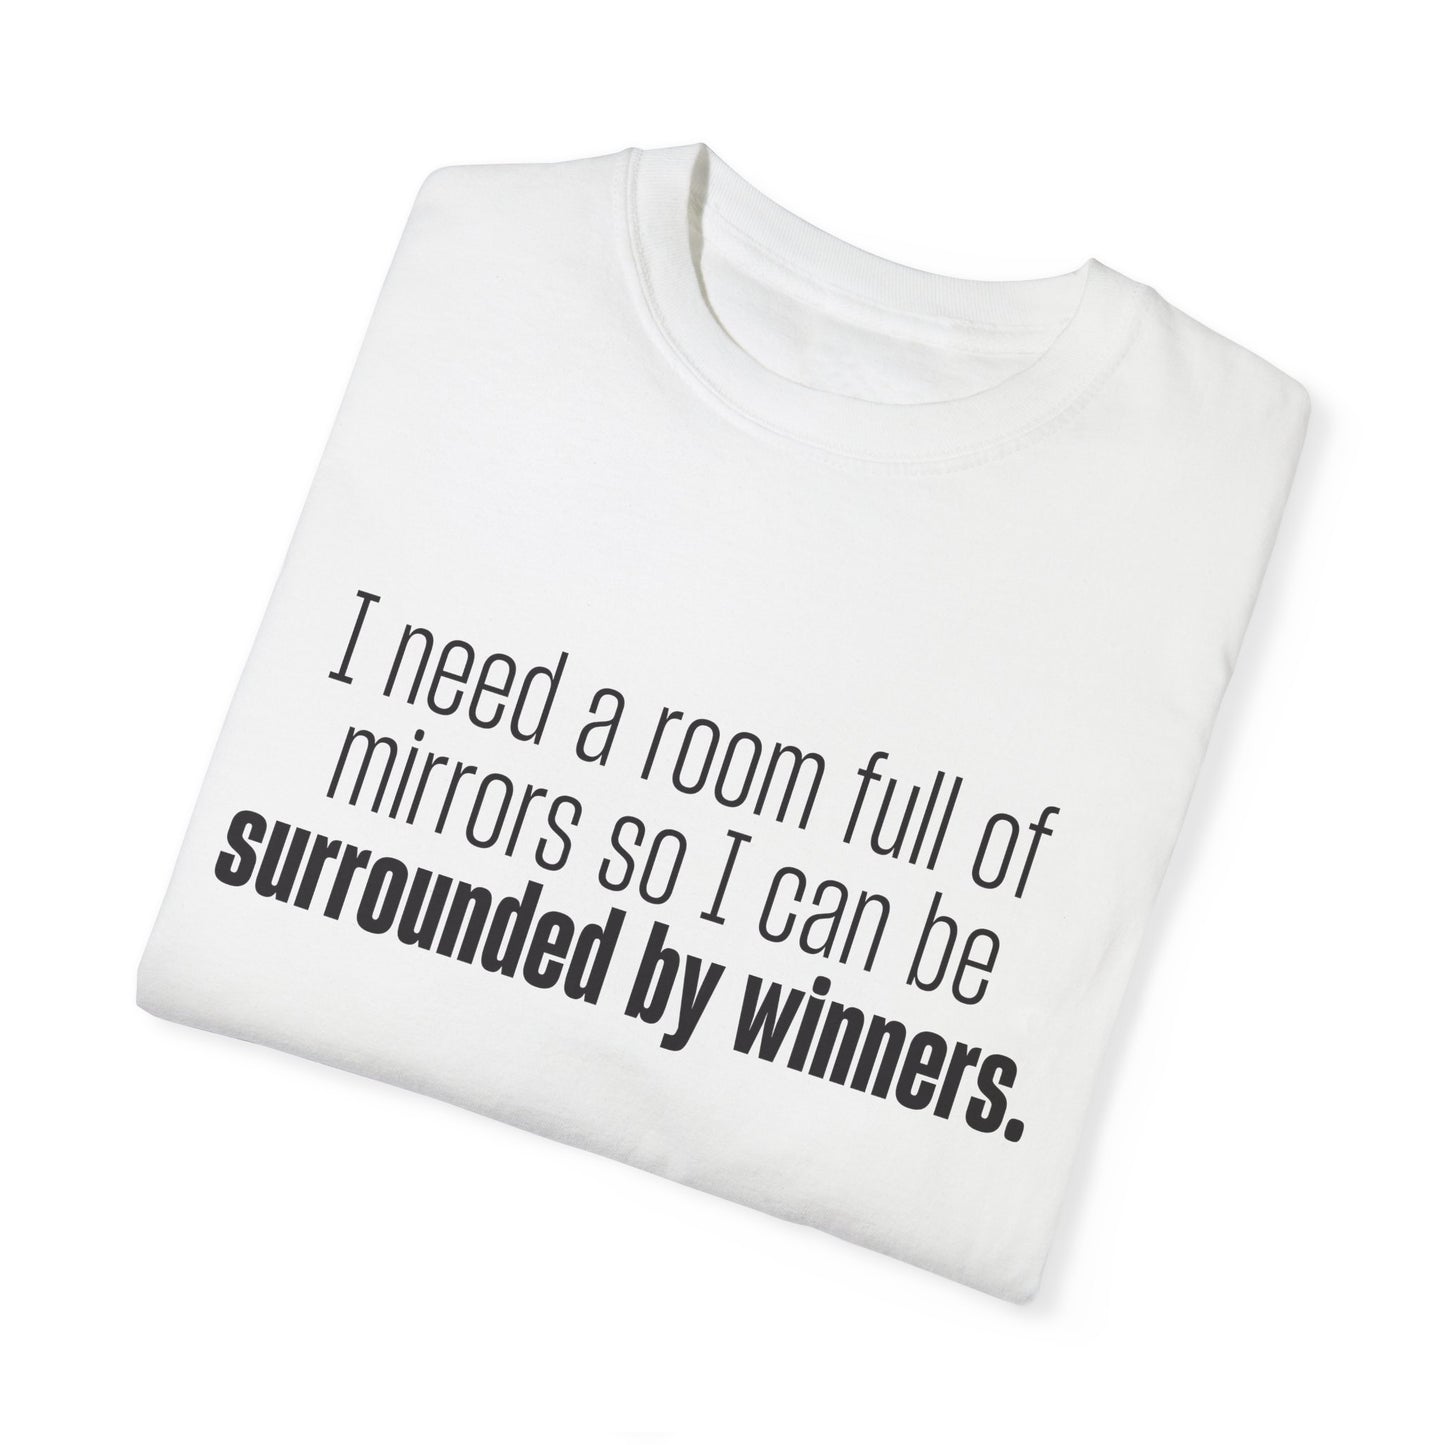 Surrounded by Winners  T- Shirt